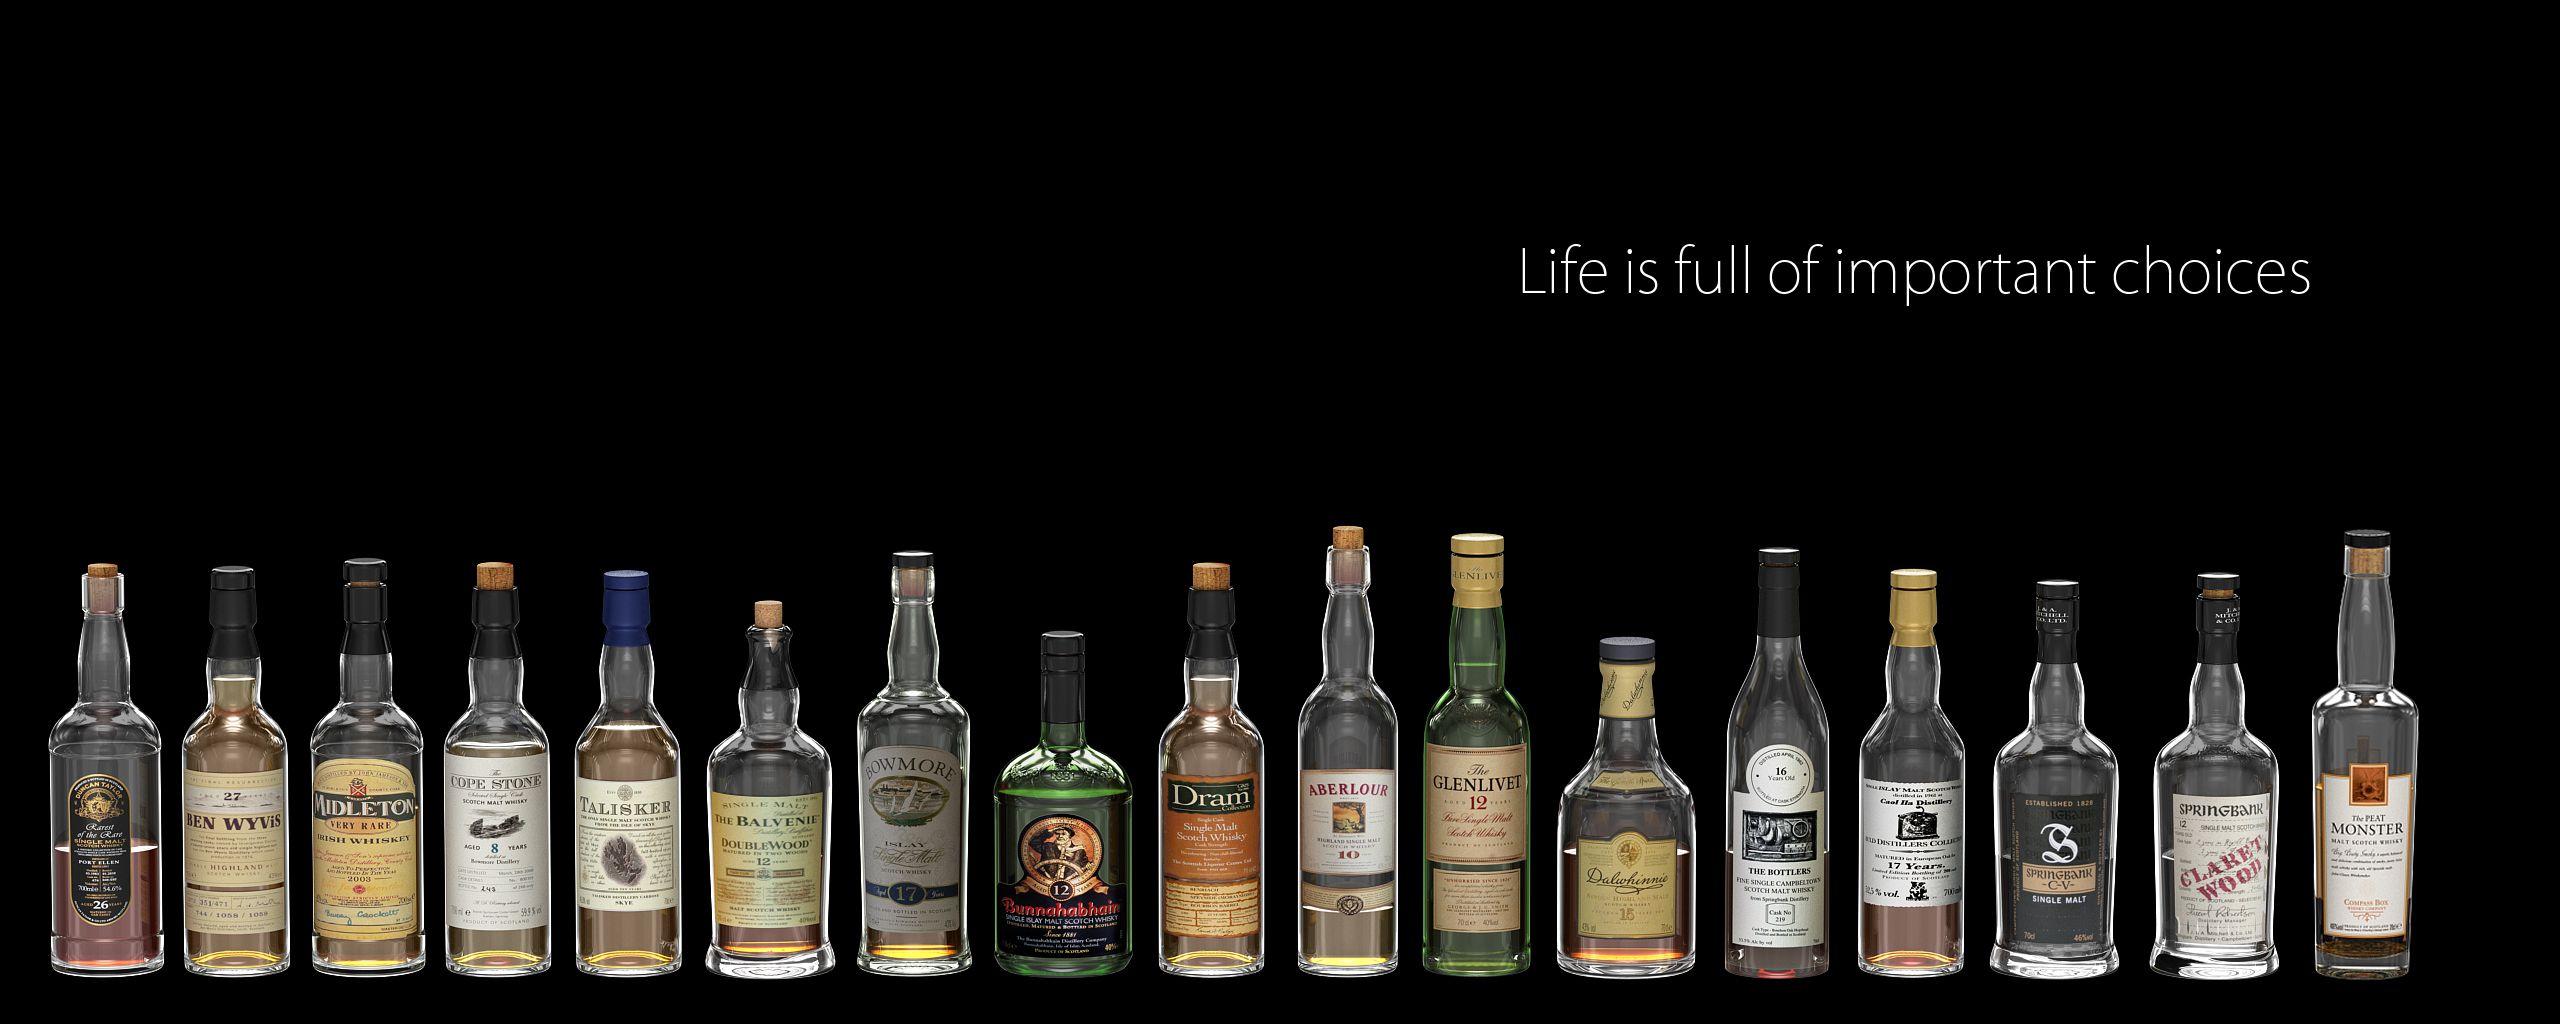 Whisky Wallpaper, HD Quality Whisky Image, Whisky Wallpaper